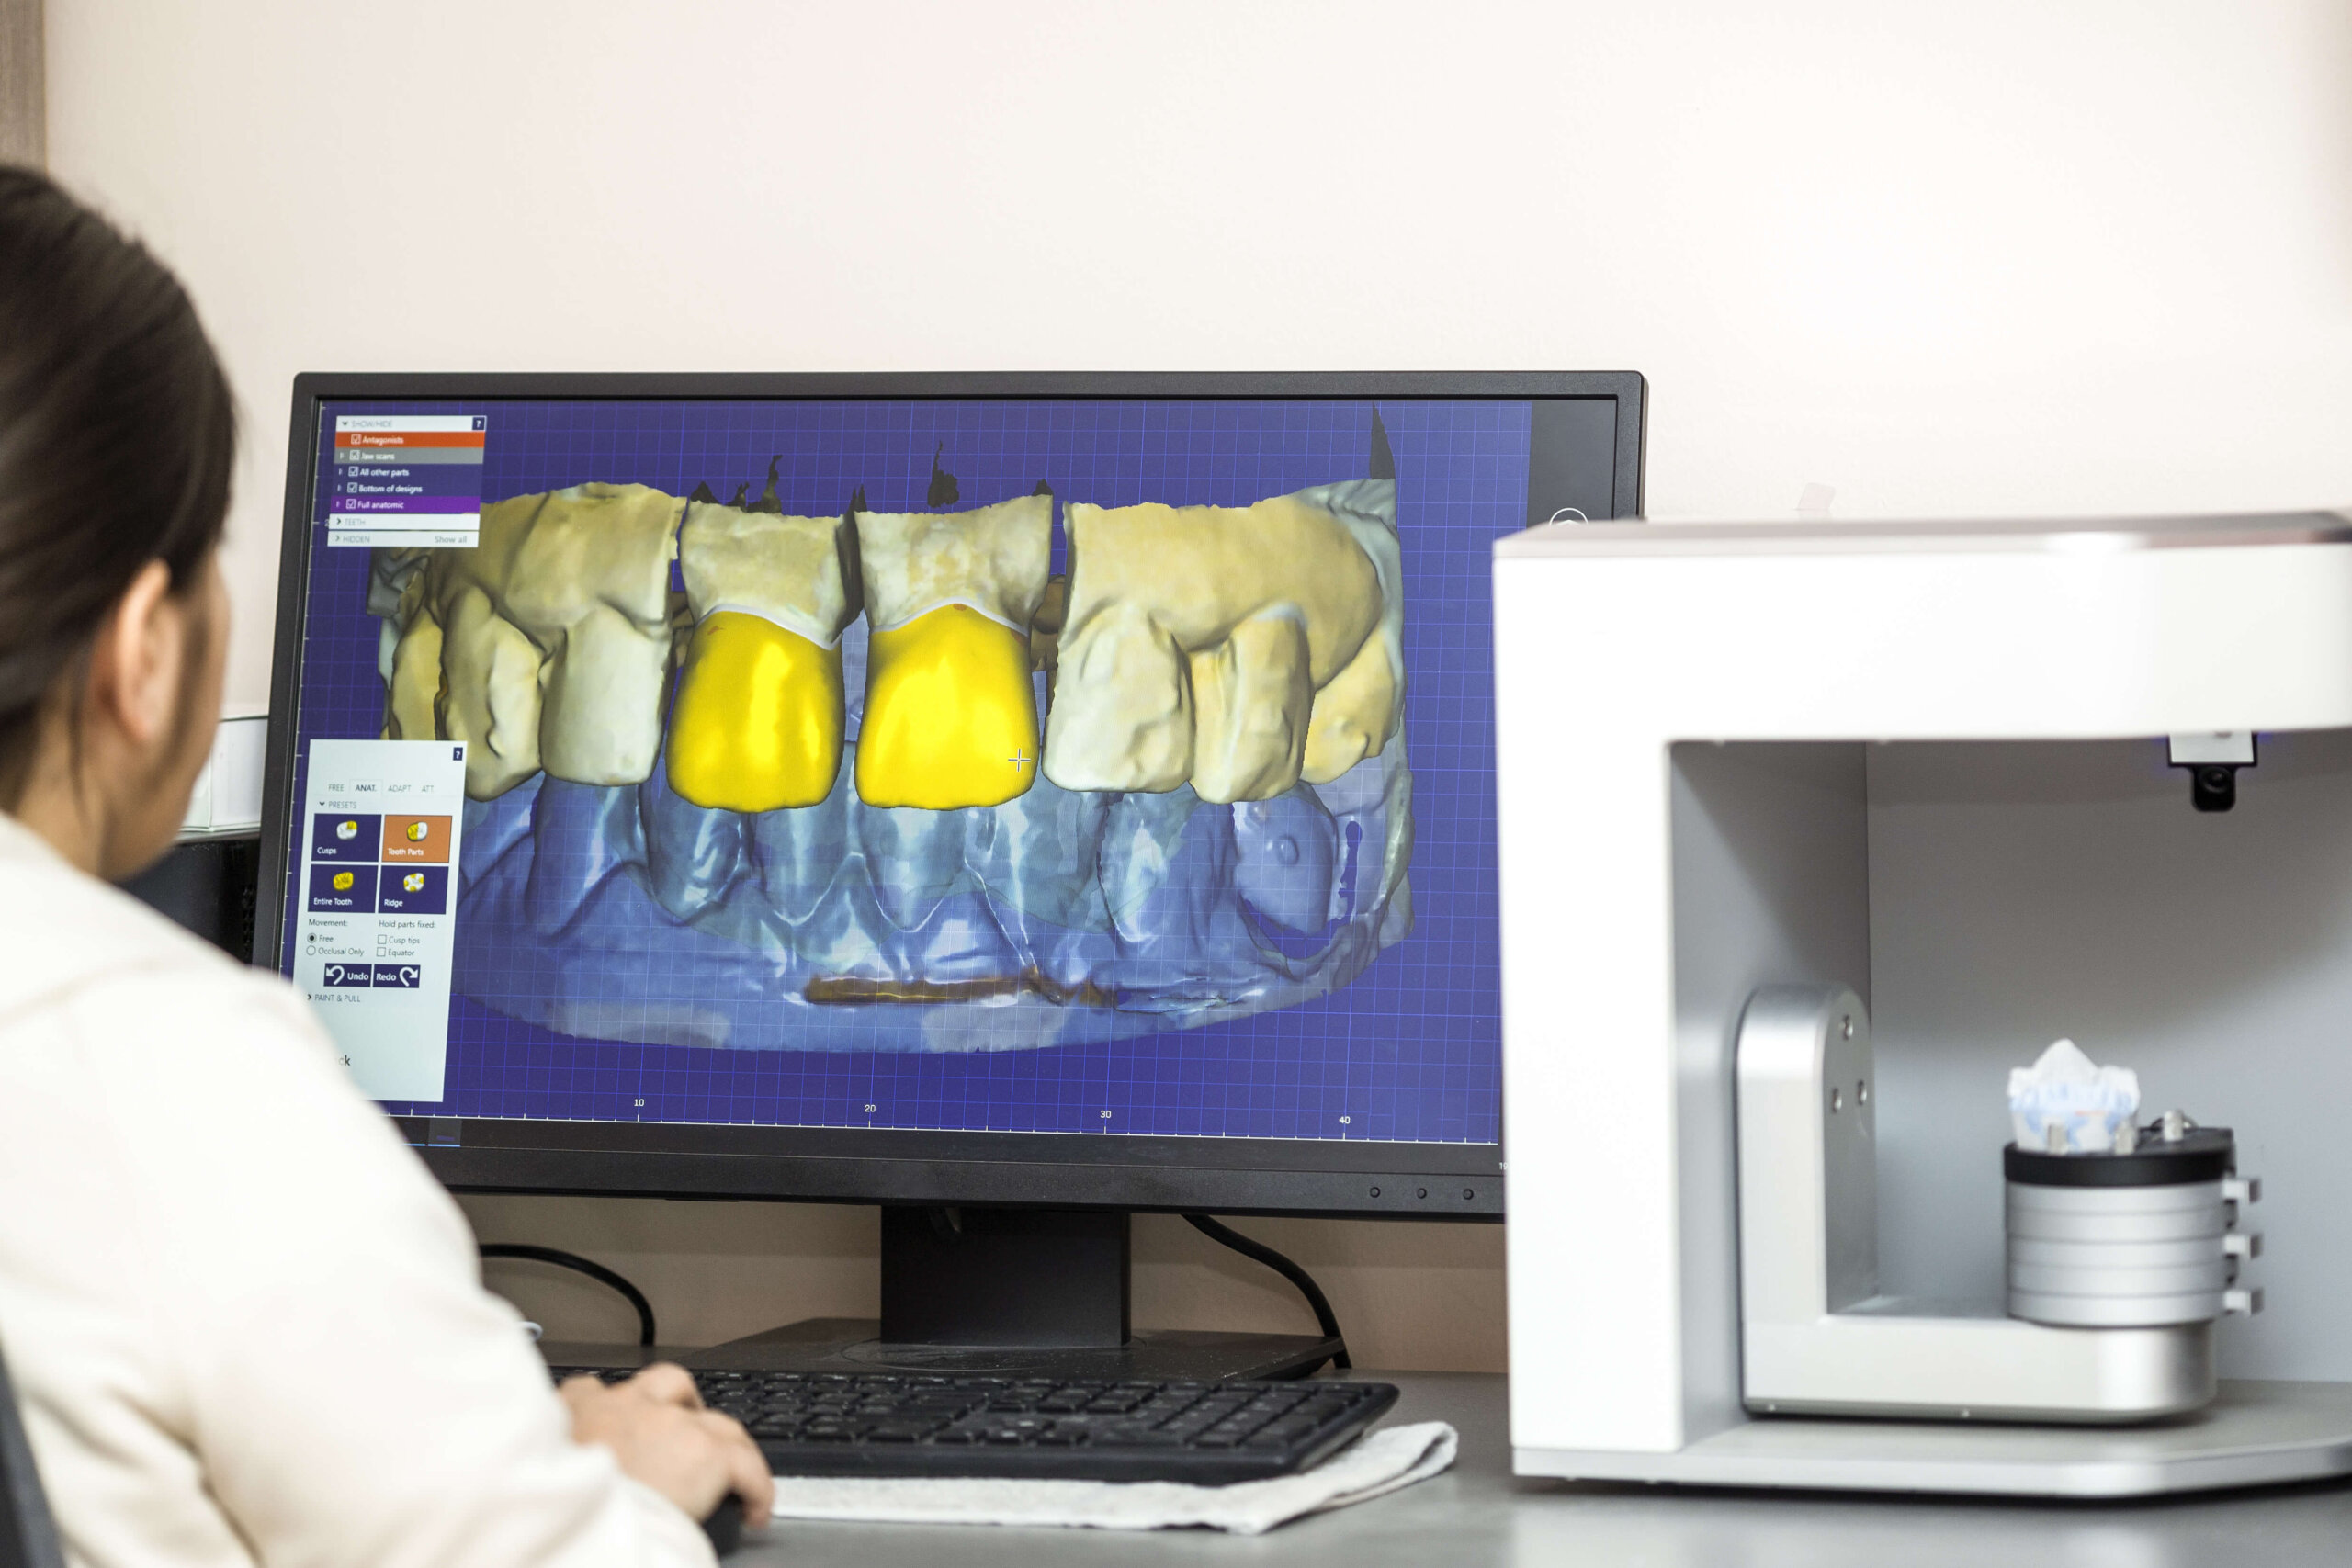 Digital scanning is also known as 3-D intraoral scanning